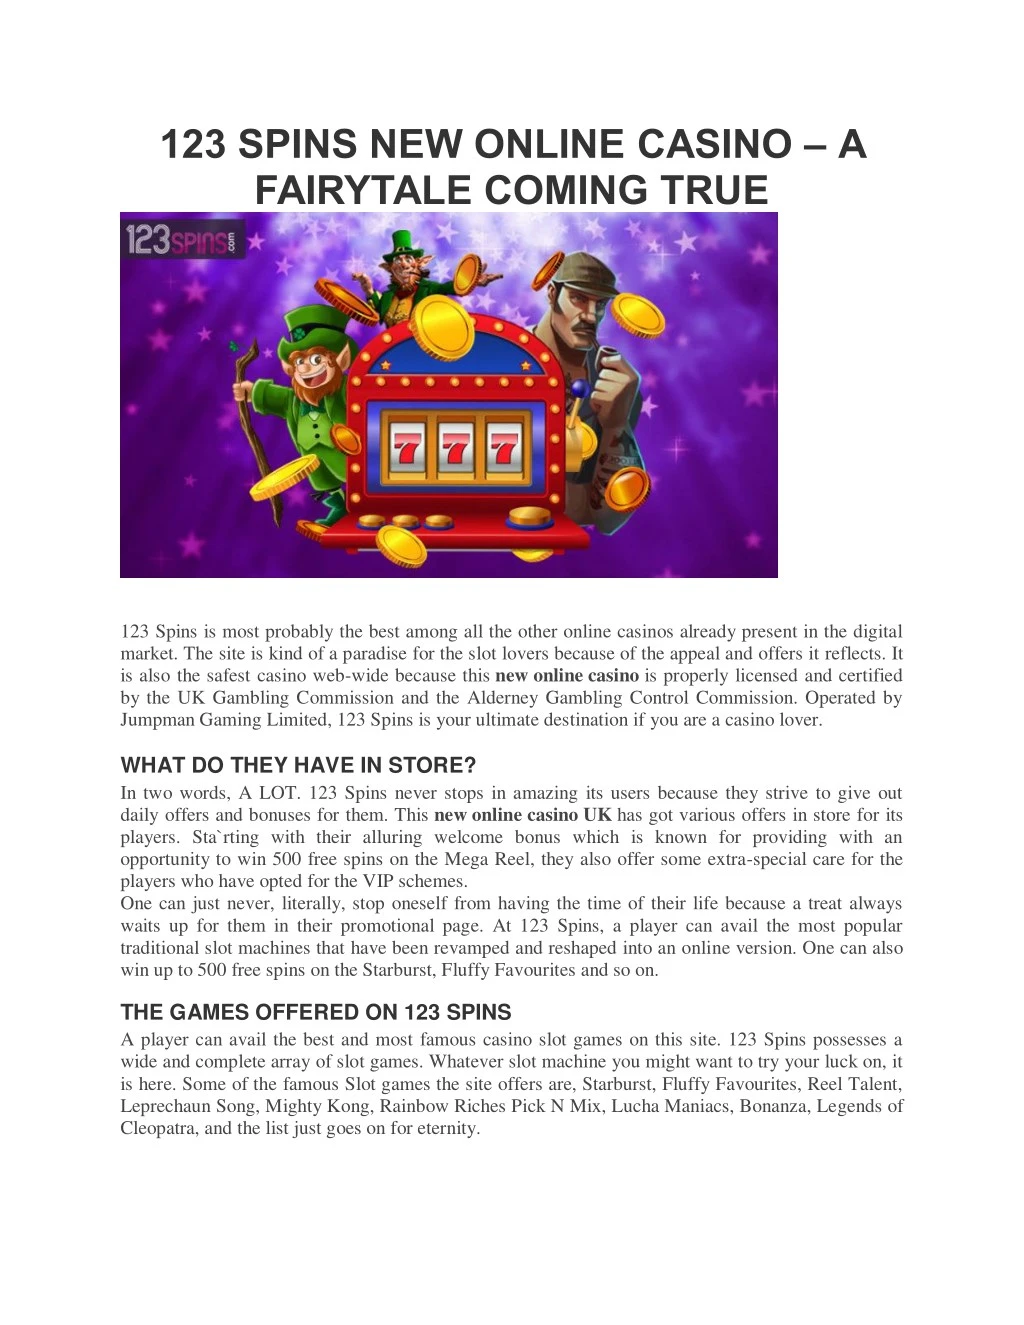 123 spins new online casino a fairytale coming n.